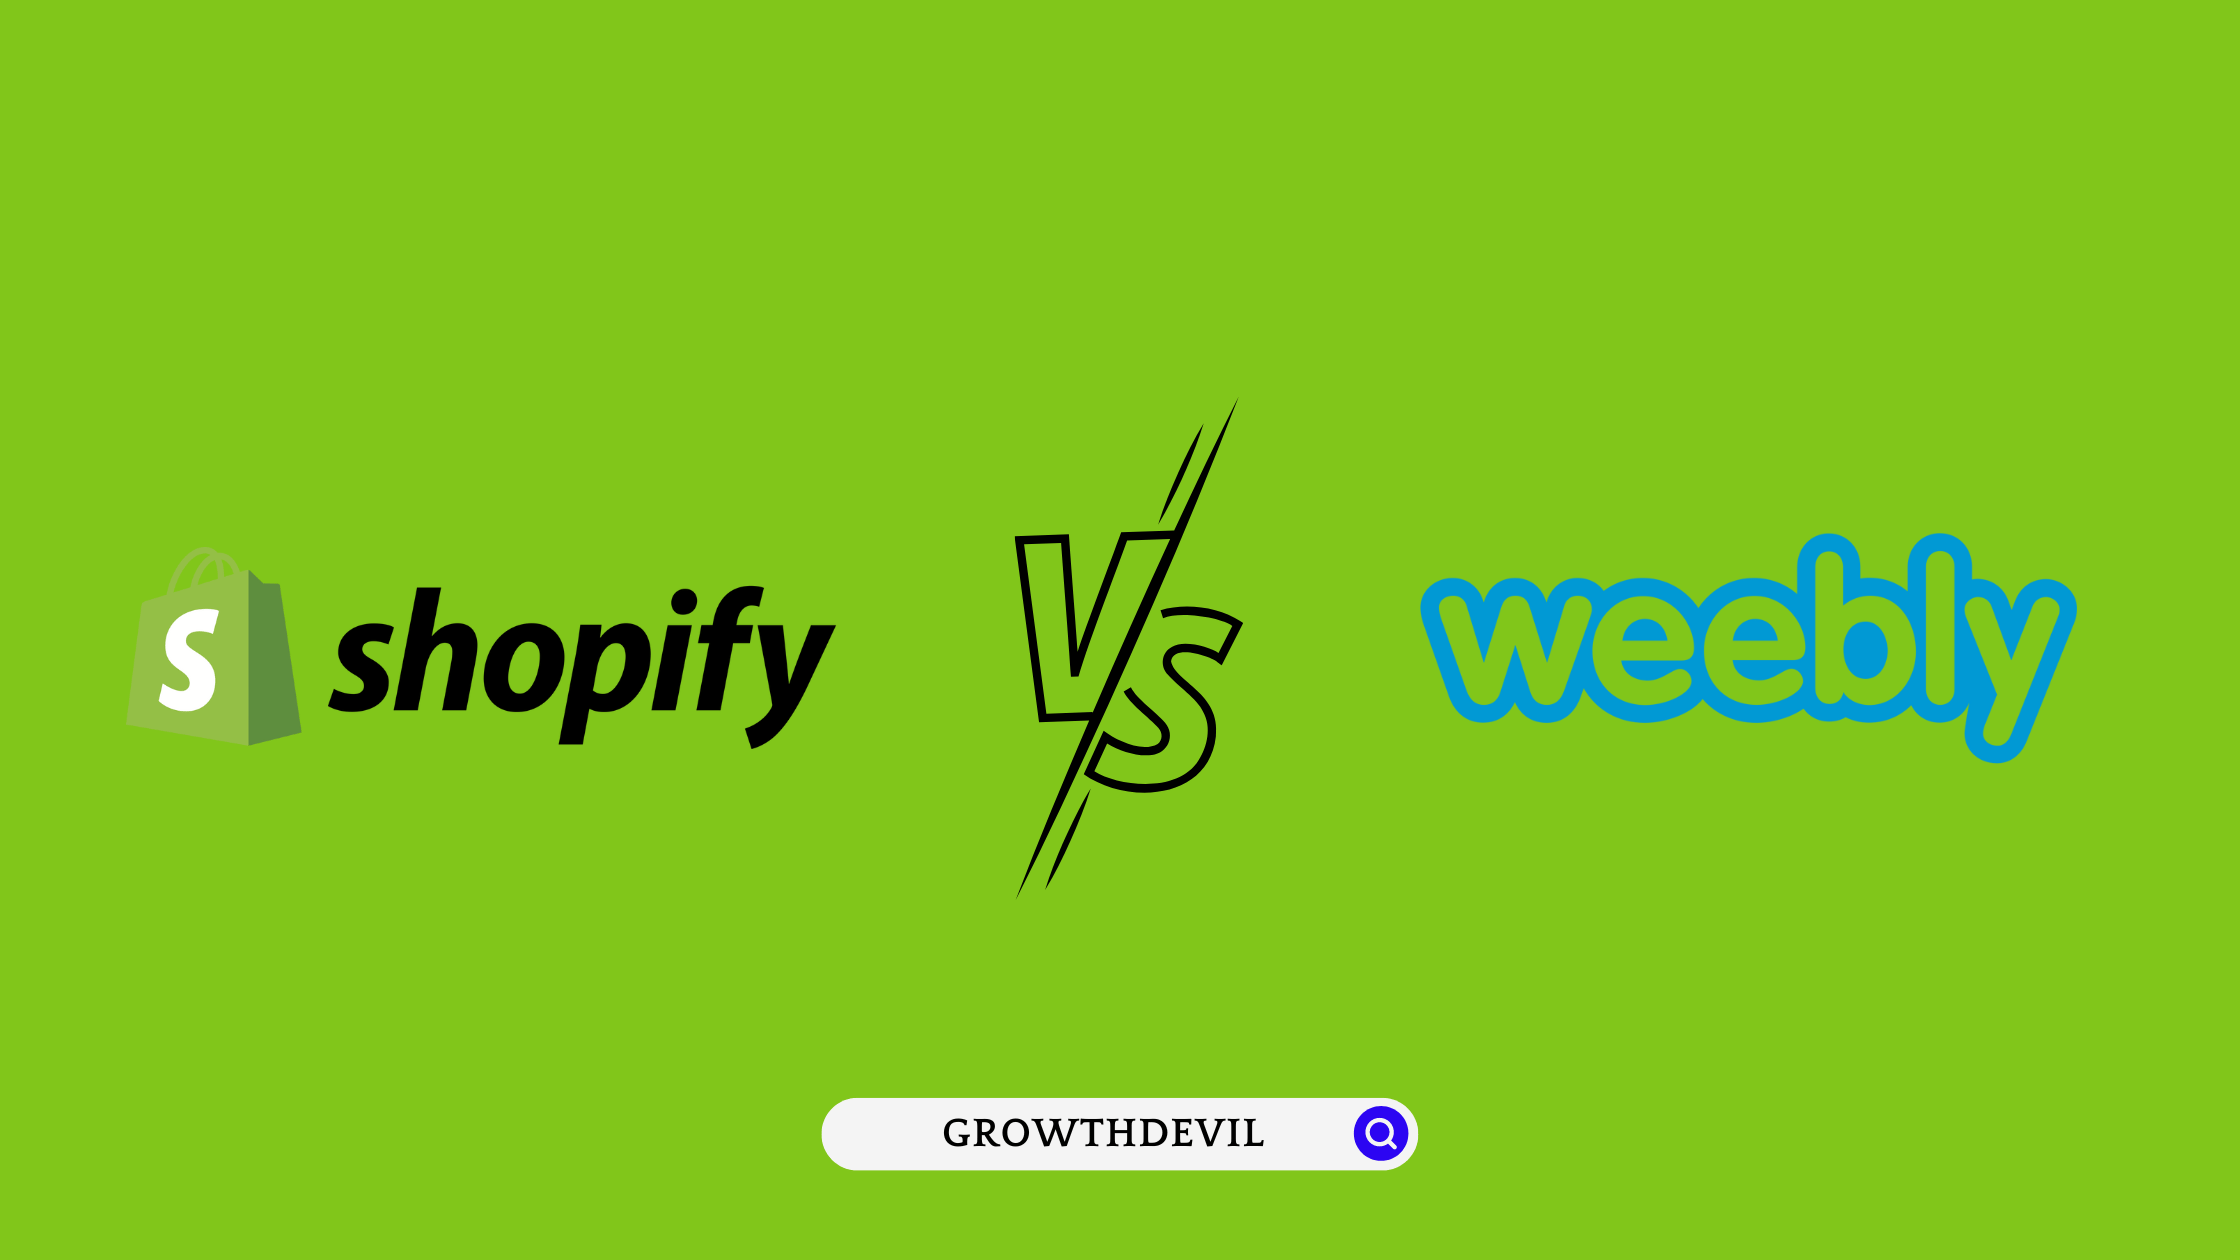 Shopify vs Weebly - GrowthDevil